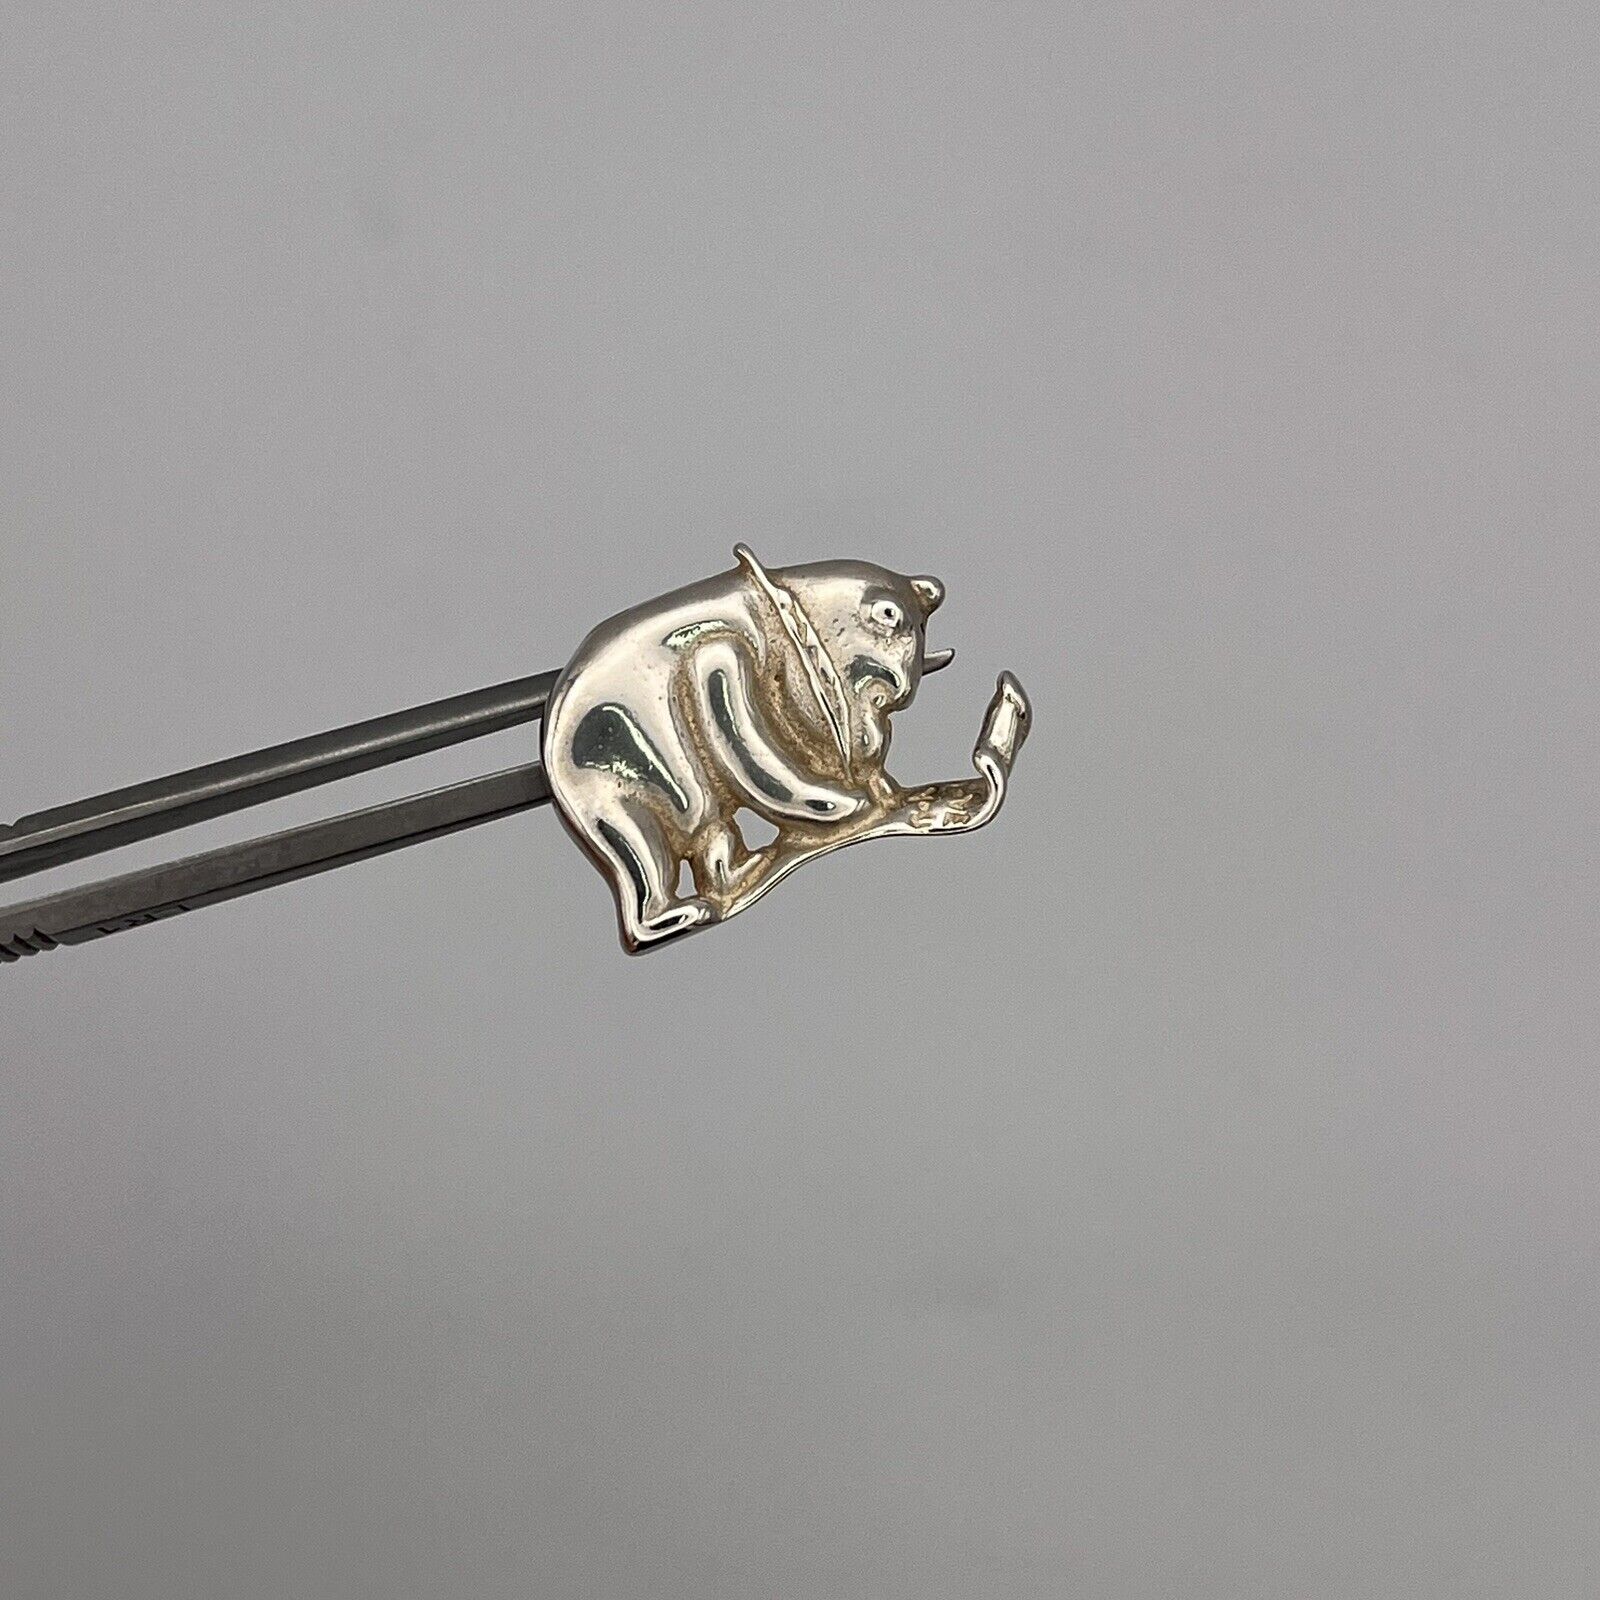 DISNEY WINNIE THE POOH BEAR LOVE YOU PIN BROOCH AUTHENTIC STERLING SILVER 3.4g